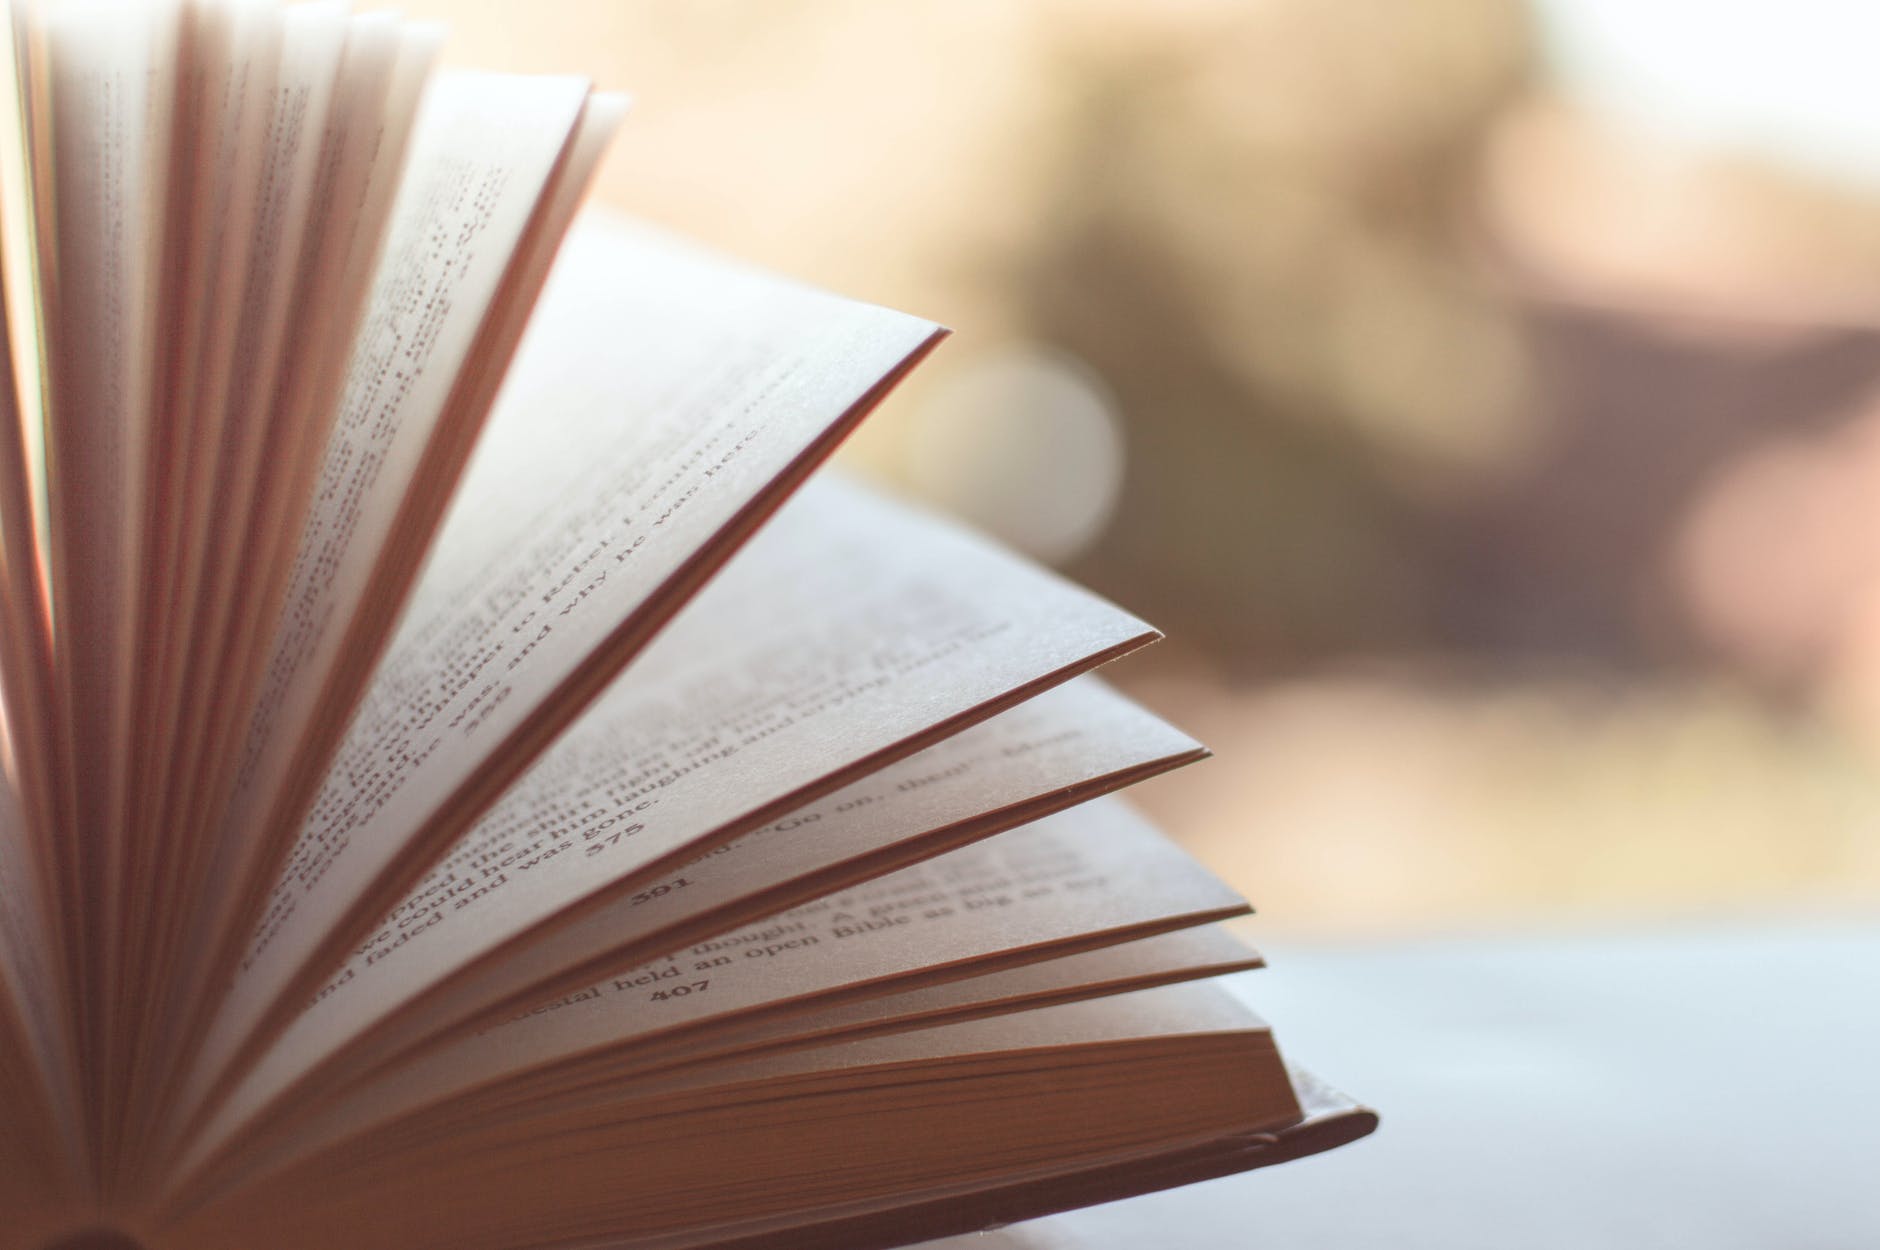 Book fanned open in front of out-of-focus outdoor backdrop. Photo by Caio on Pexels.com.